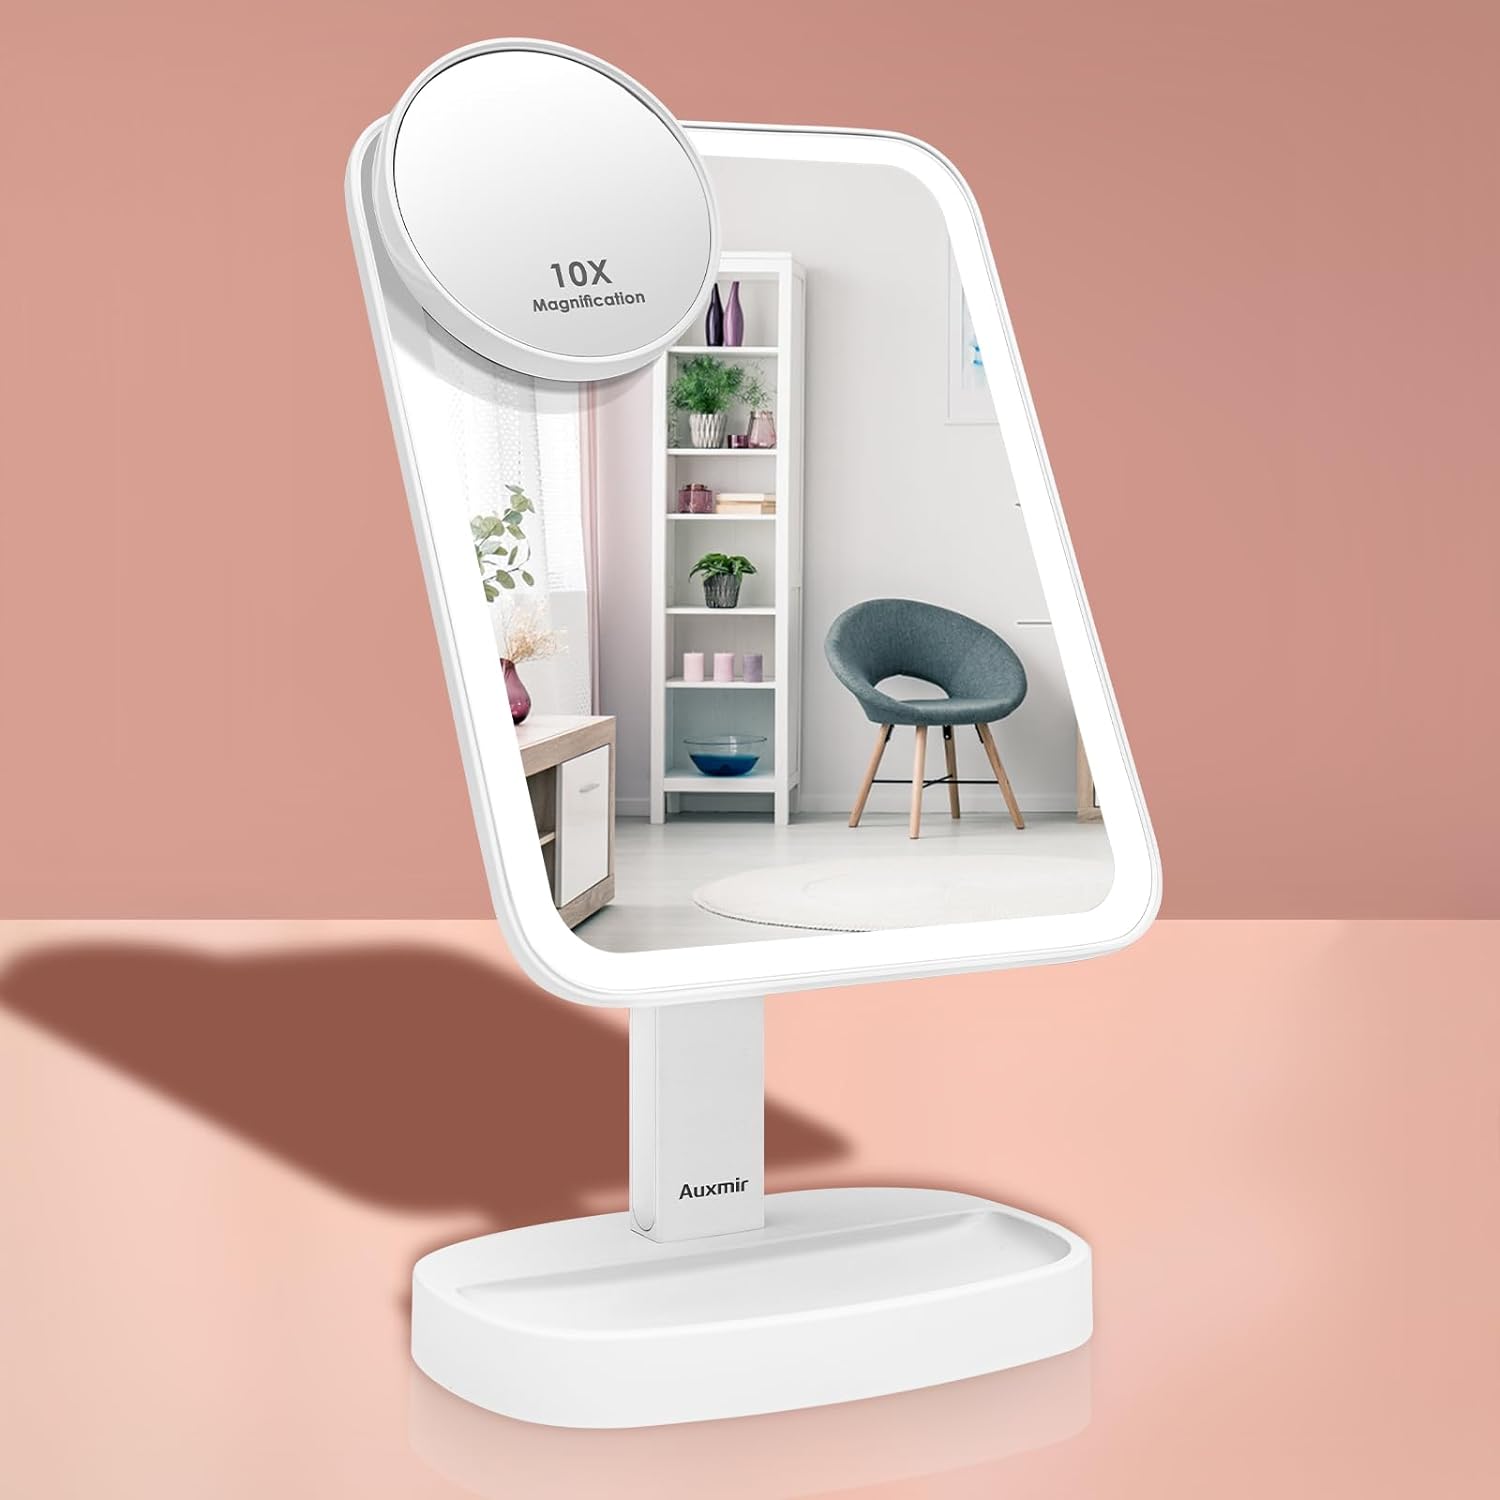 🌟 Act Fast! Auxmir Makeup Mirror with Light - 10% Off, Now Only £29.50!